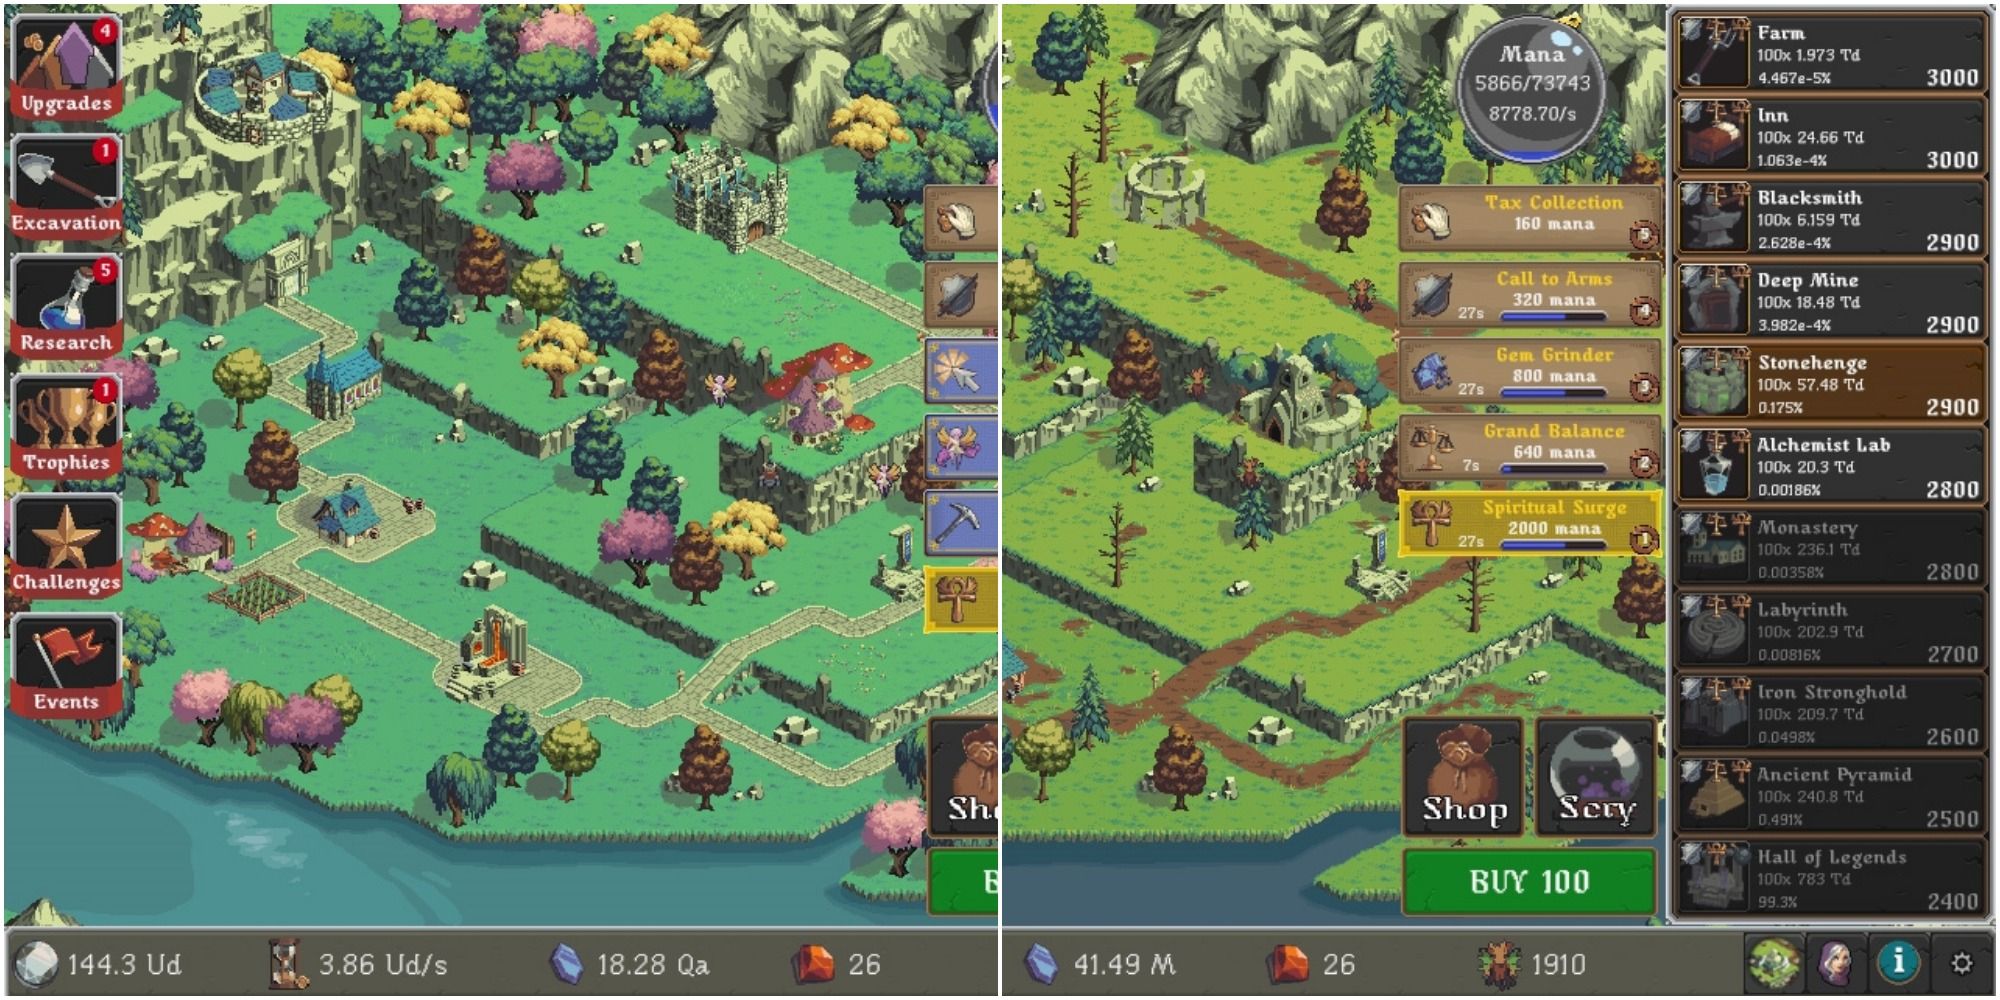 A split image of Realm Grinder menu in lush green forest and menu of buildings over green forest